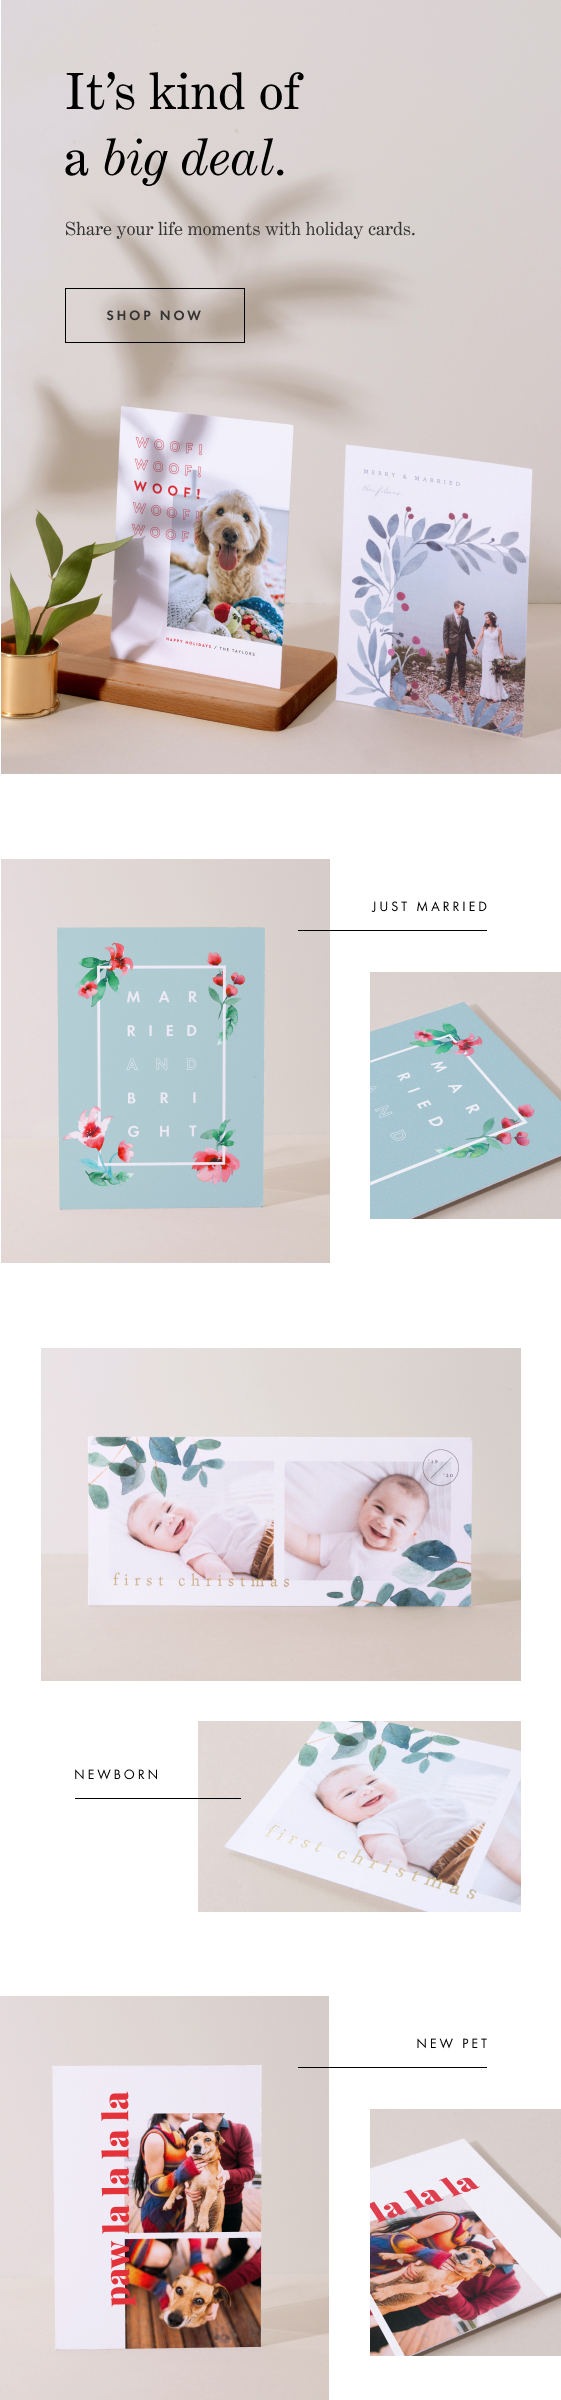 Holiday Cards for all Milestones